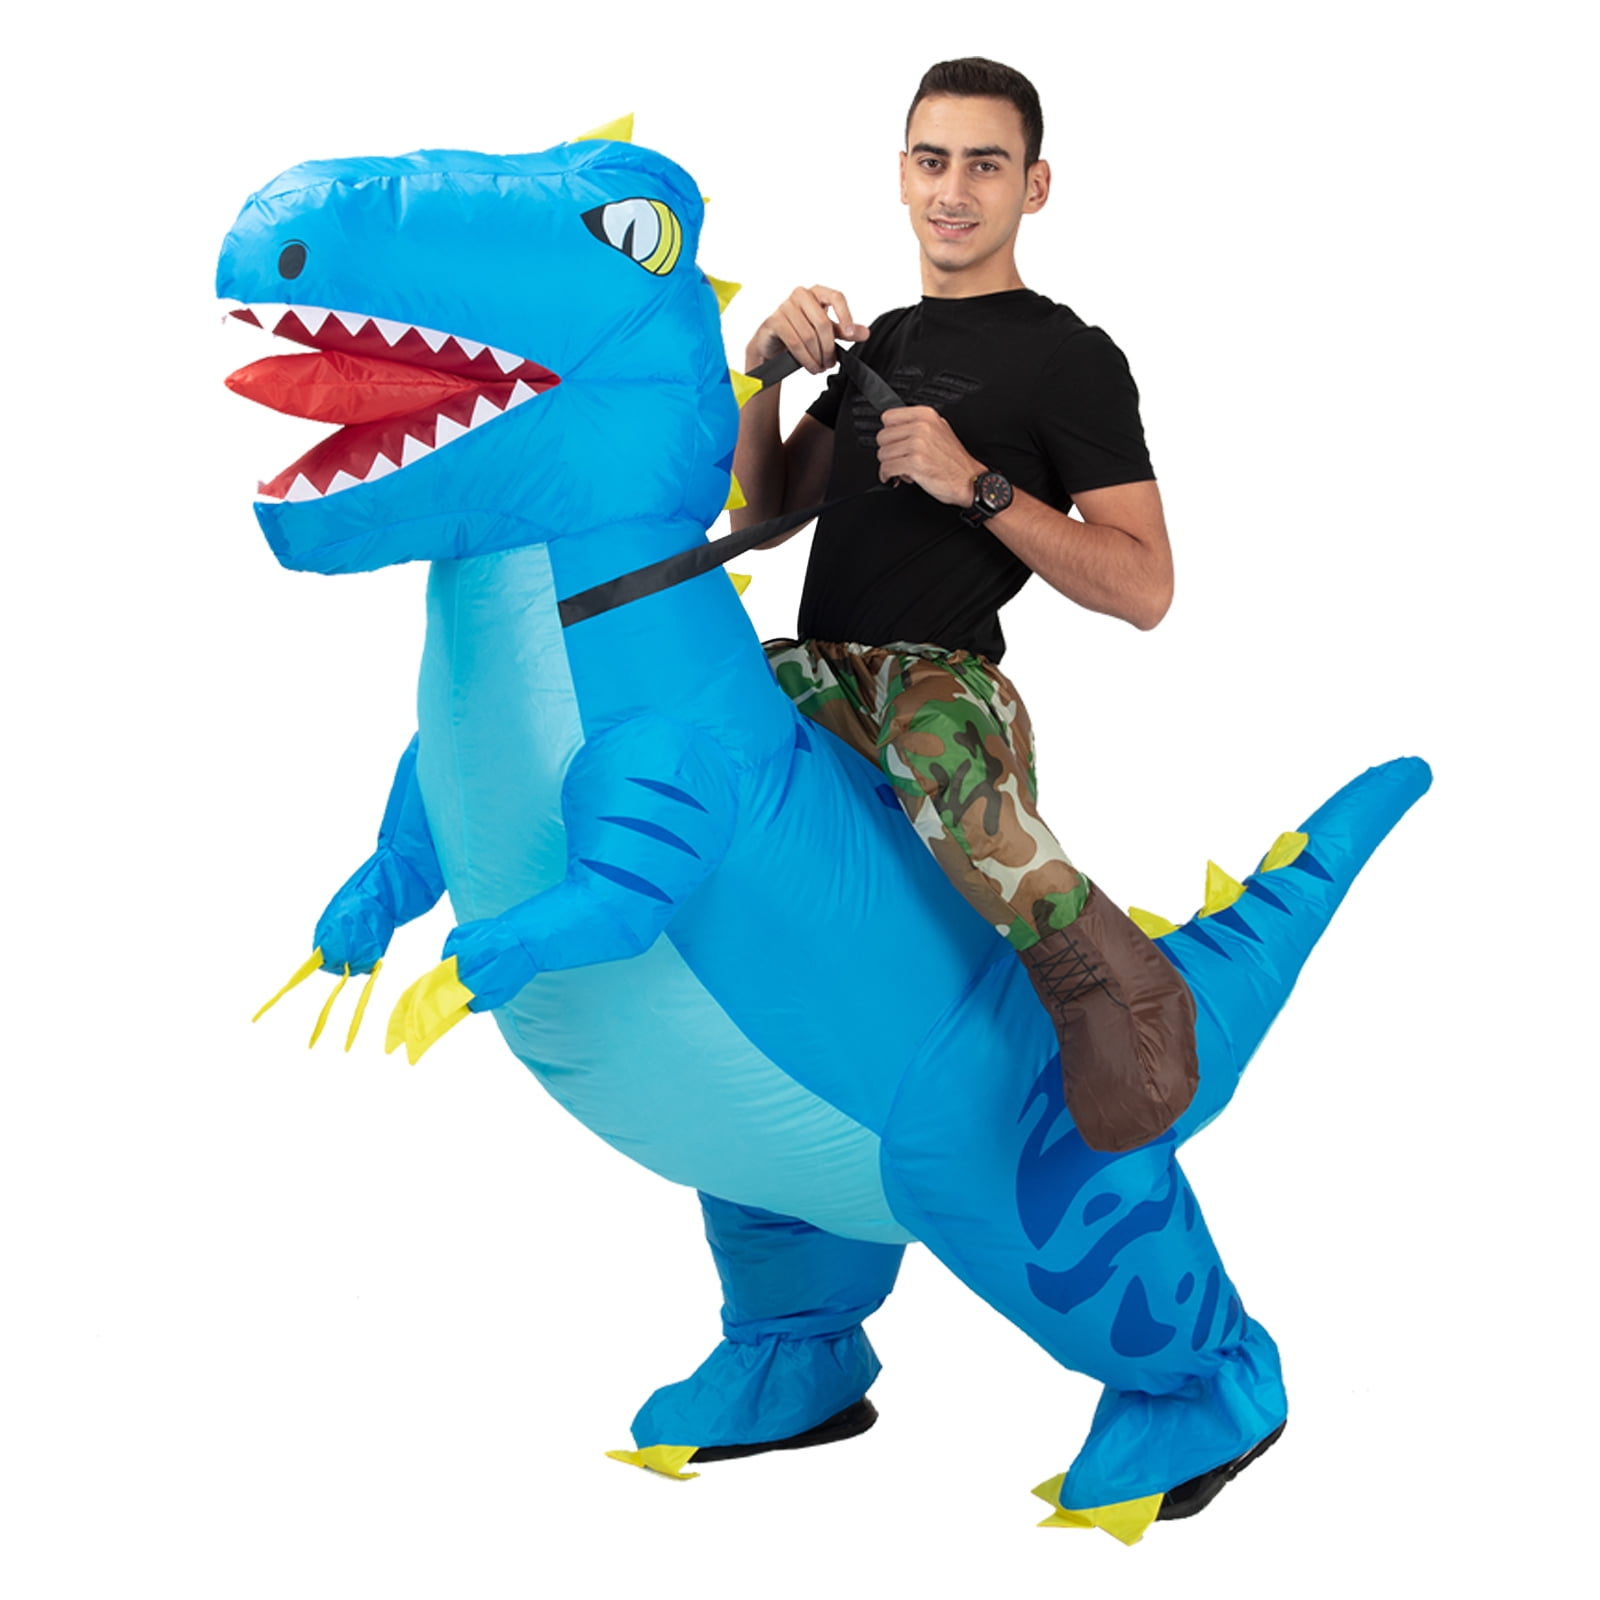 Buy Dinosaur Costume for Adults, Inflatable Costume, Adult Ride on ...